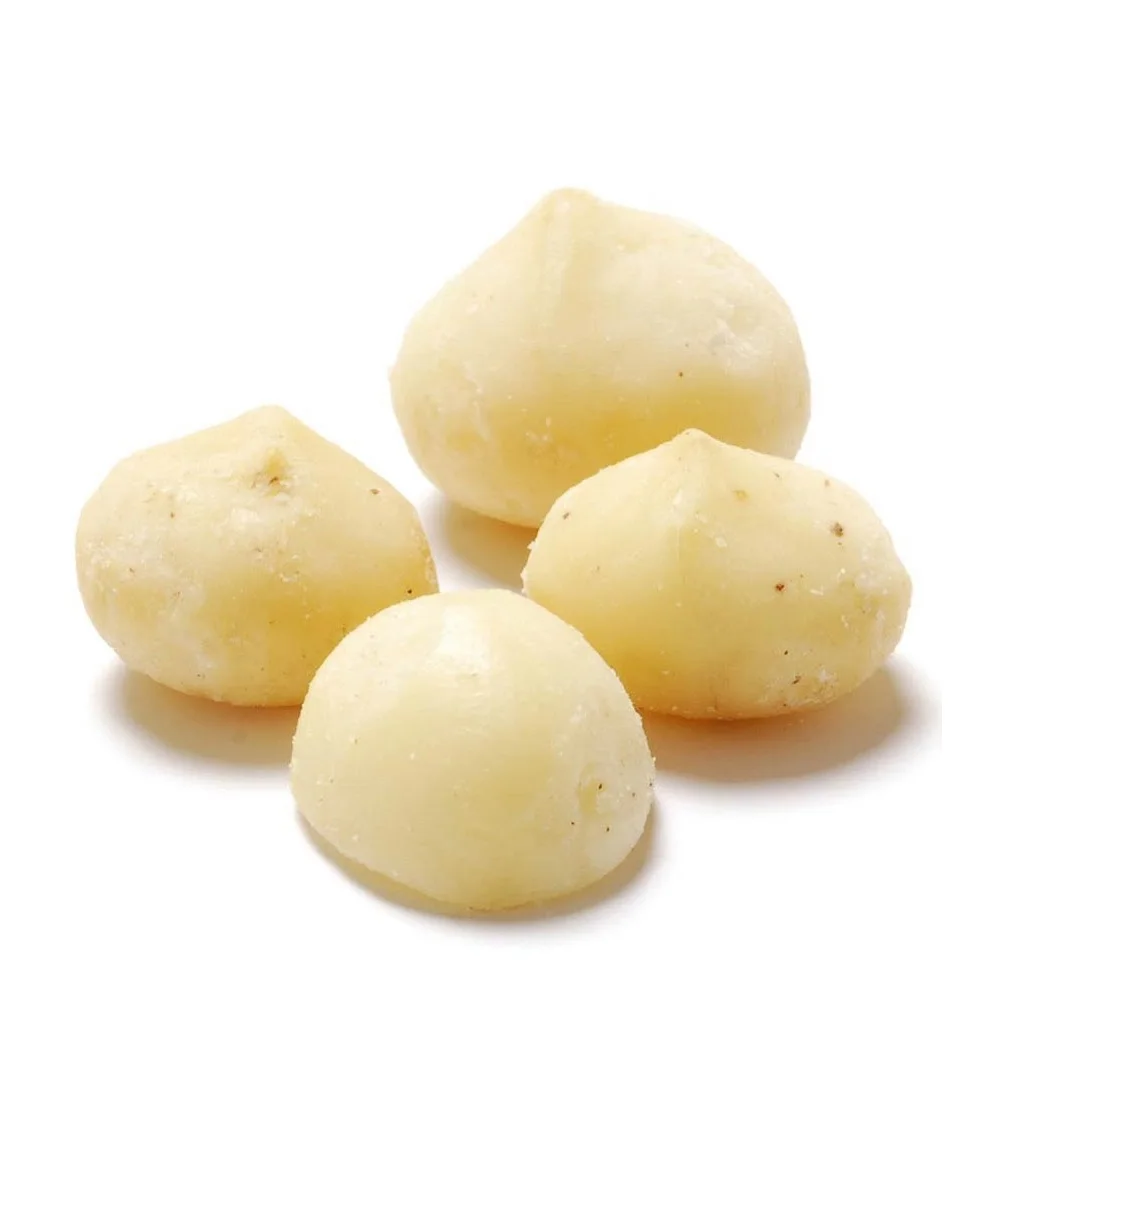 Raw And Roasted Macadamia Nuts Cheap Price Raw And Roasted Macadamia Nuts In Premium Quality (11000001447570)